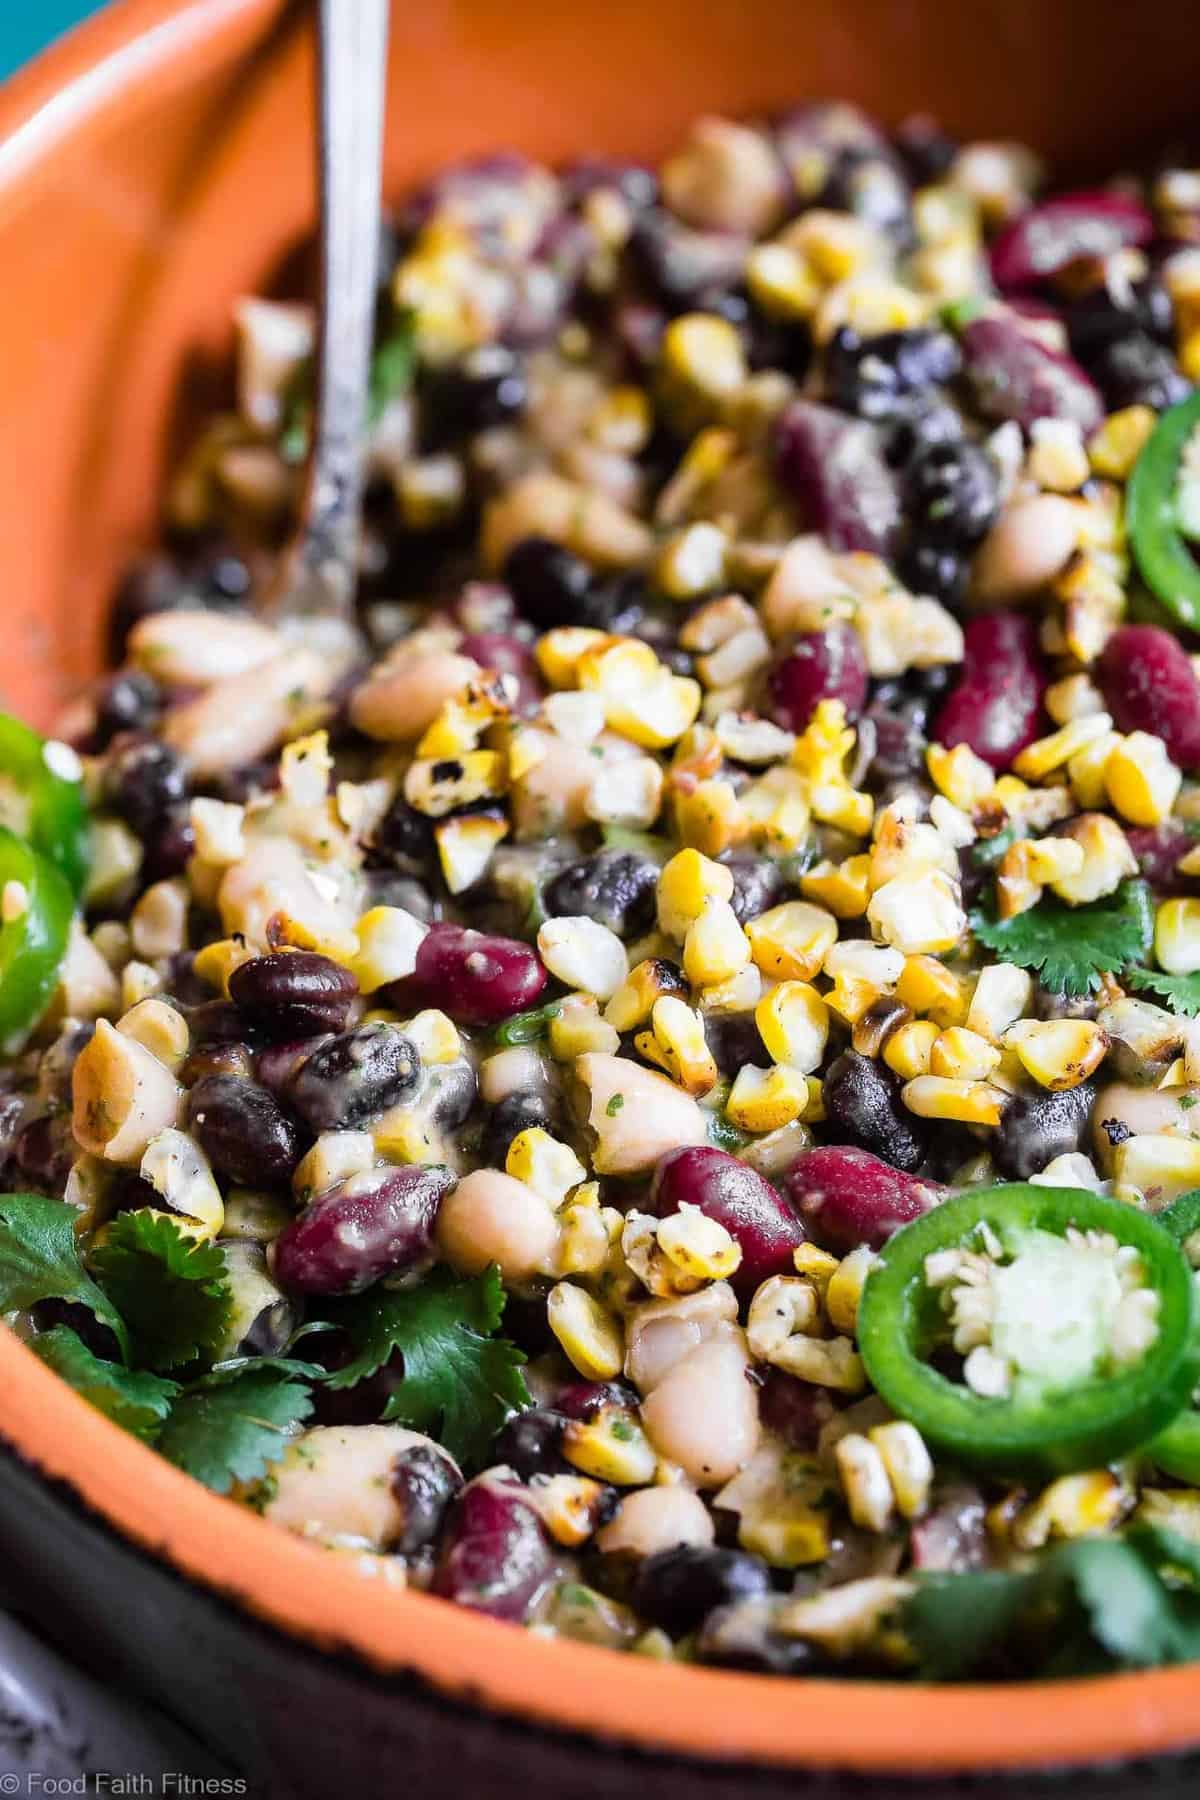 Three Bean Mexican Corn Black Bean Salad - This quick and easy, healthy three bean salad has a Mexican twist with an avocado salsa dressing! It's the perfect Summer side and it's gluten free, vegan and only one Weight Watchers Freestyle point! | #Foodfaithfitness | #Glutenfree #Vegan #Weightwatchers #Healthy #July4th